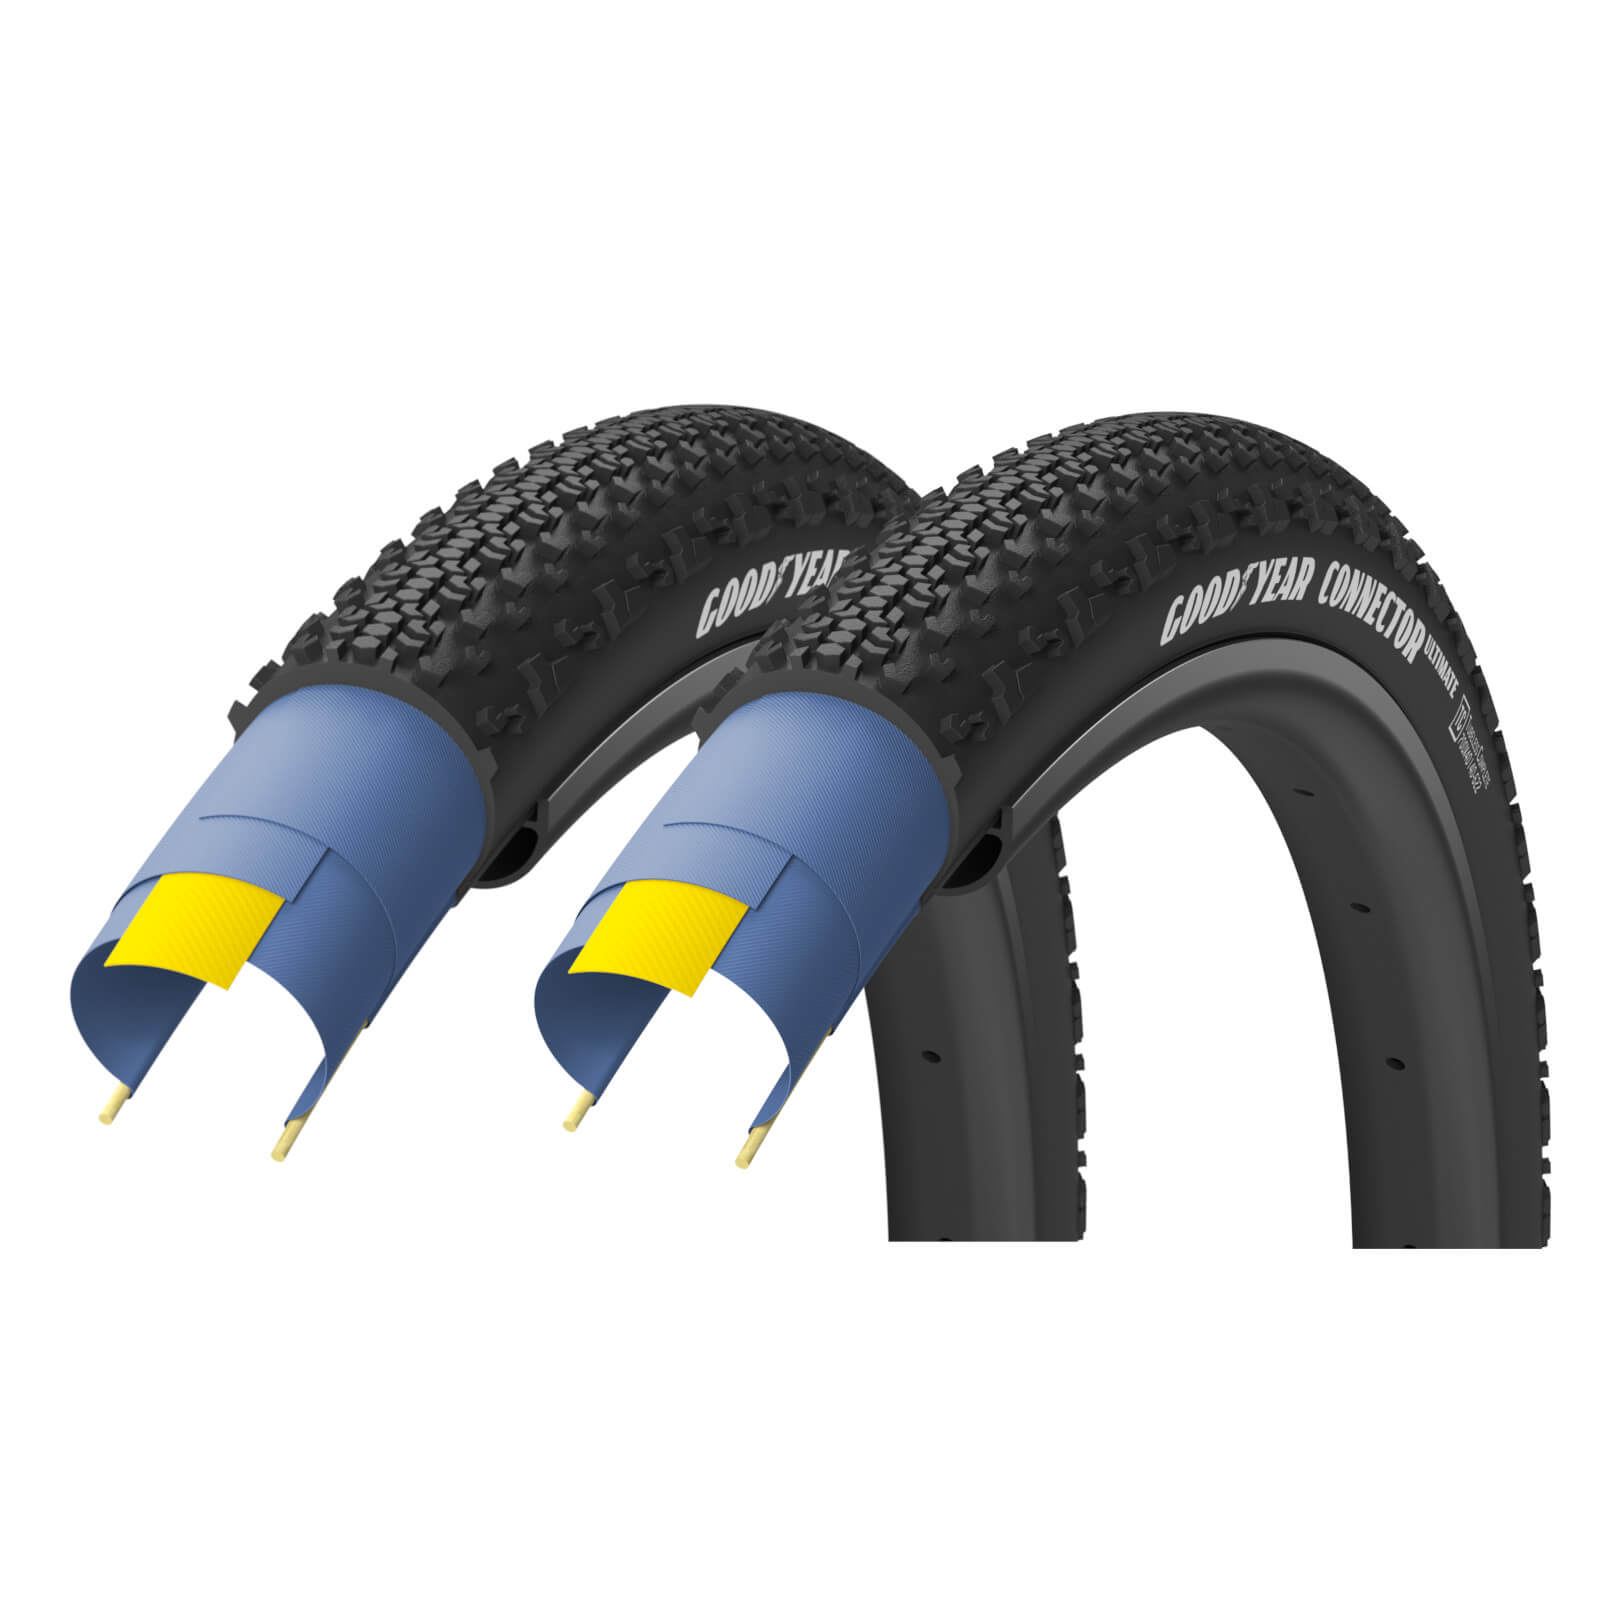 Goodyear Connector Ultimate A/T Tubeless Gravel Tyre Twin Pack - 650b x 50mm - Black